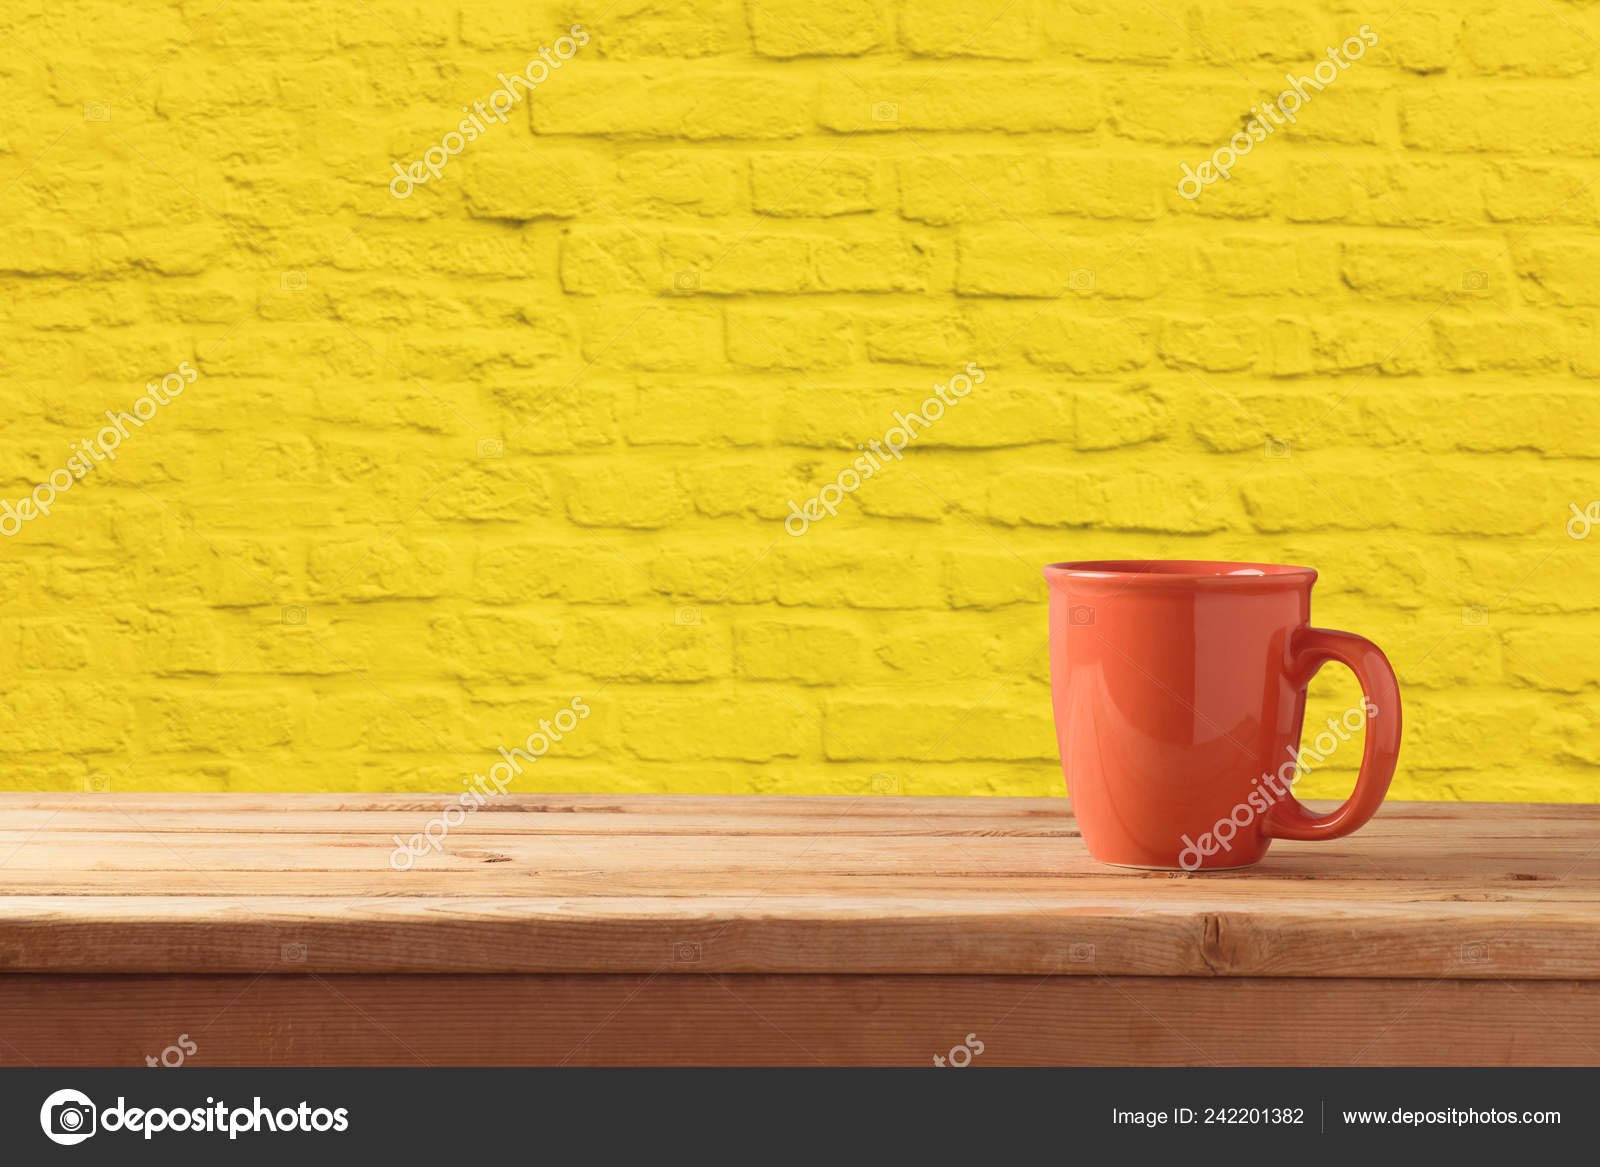 Red Coffee Tea Cup Wooden Table Yellow Brick Stone Wall Stock Photo by  ©maglara 242201382